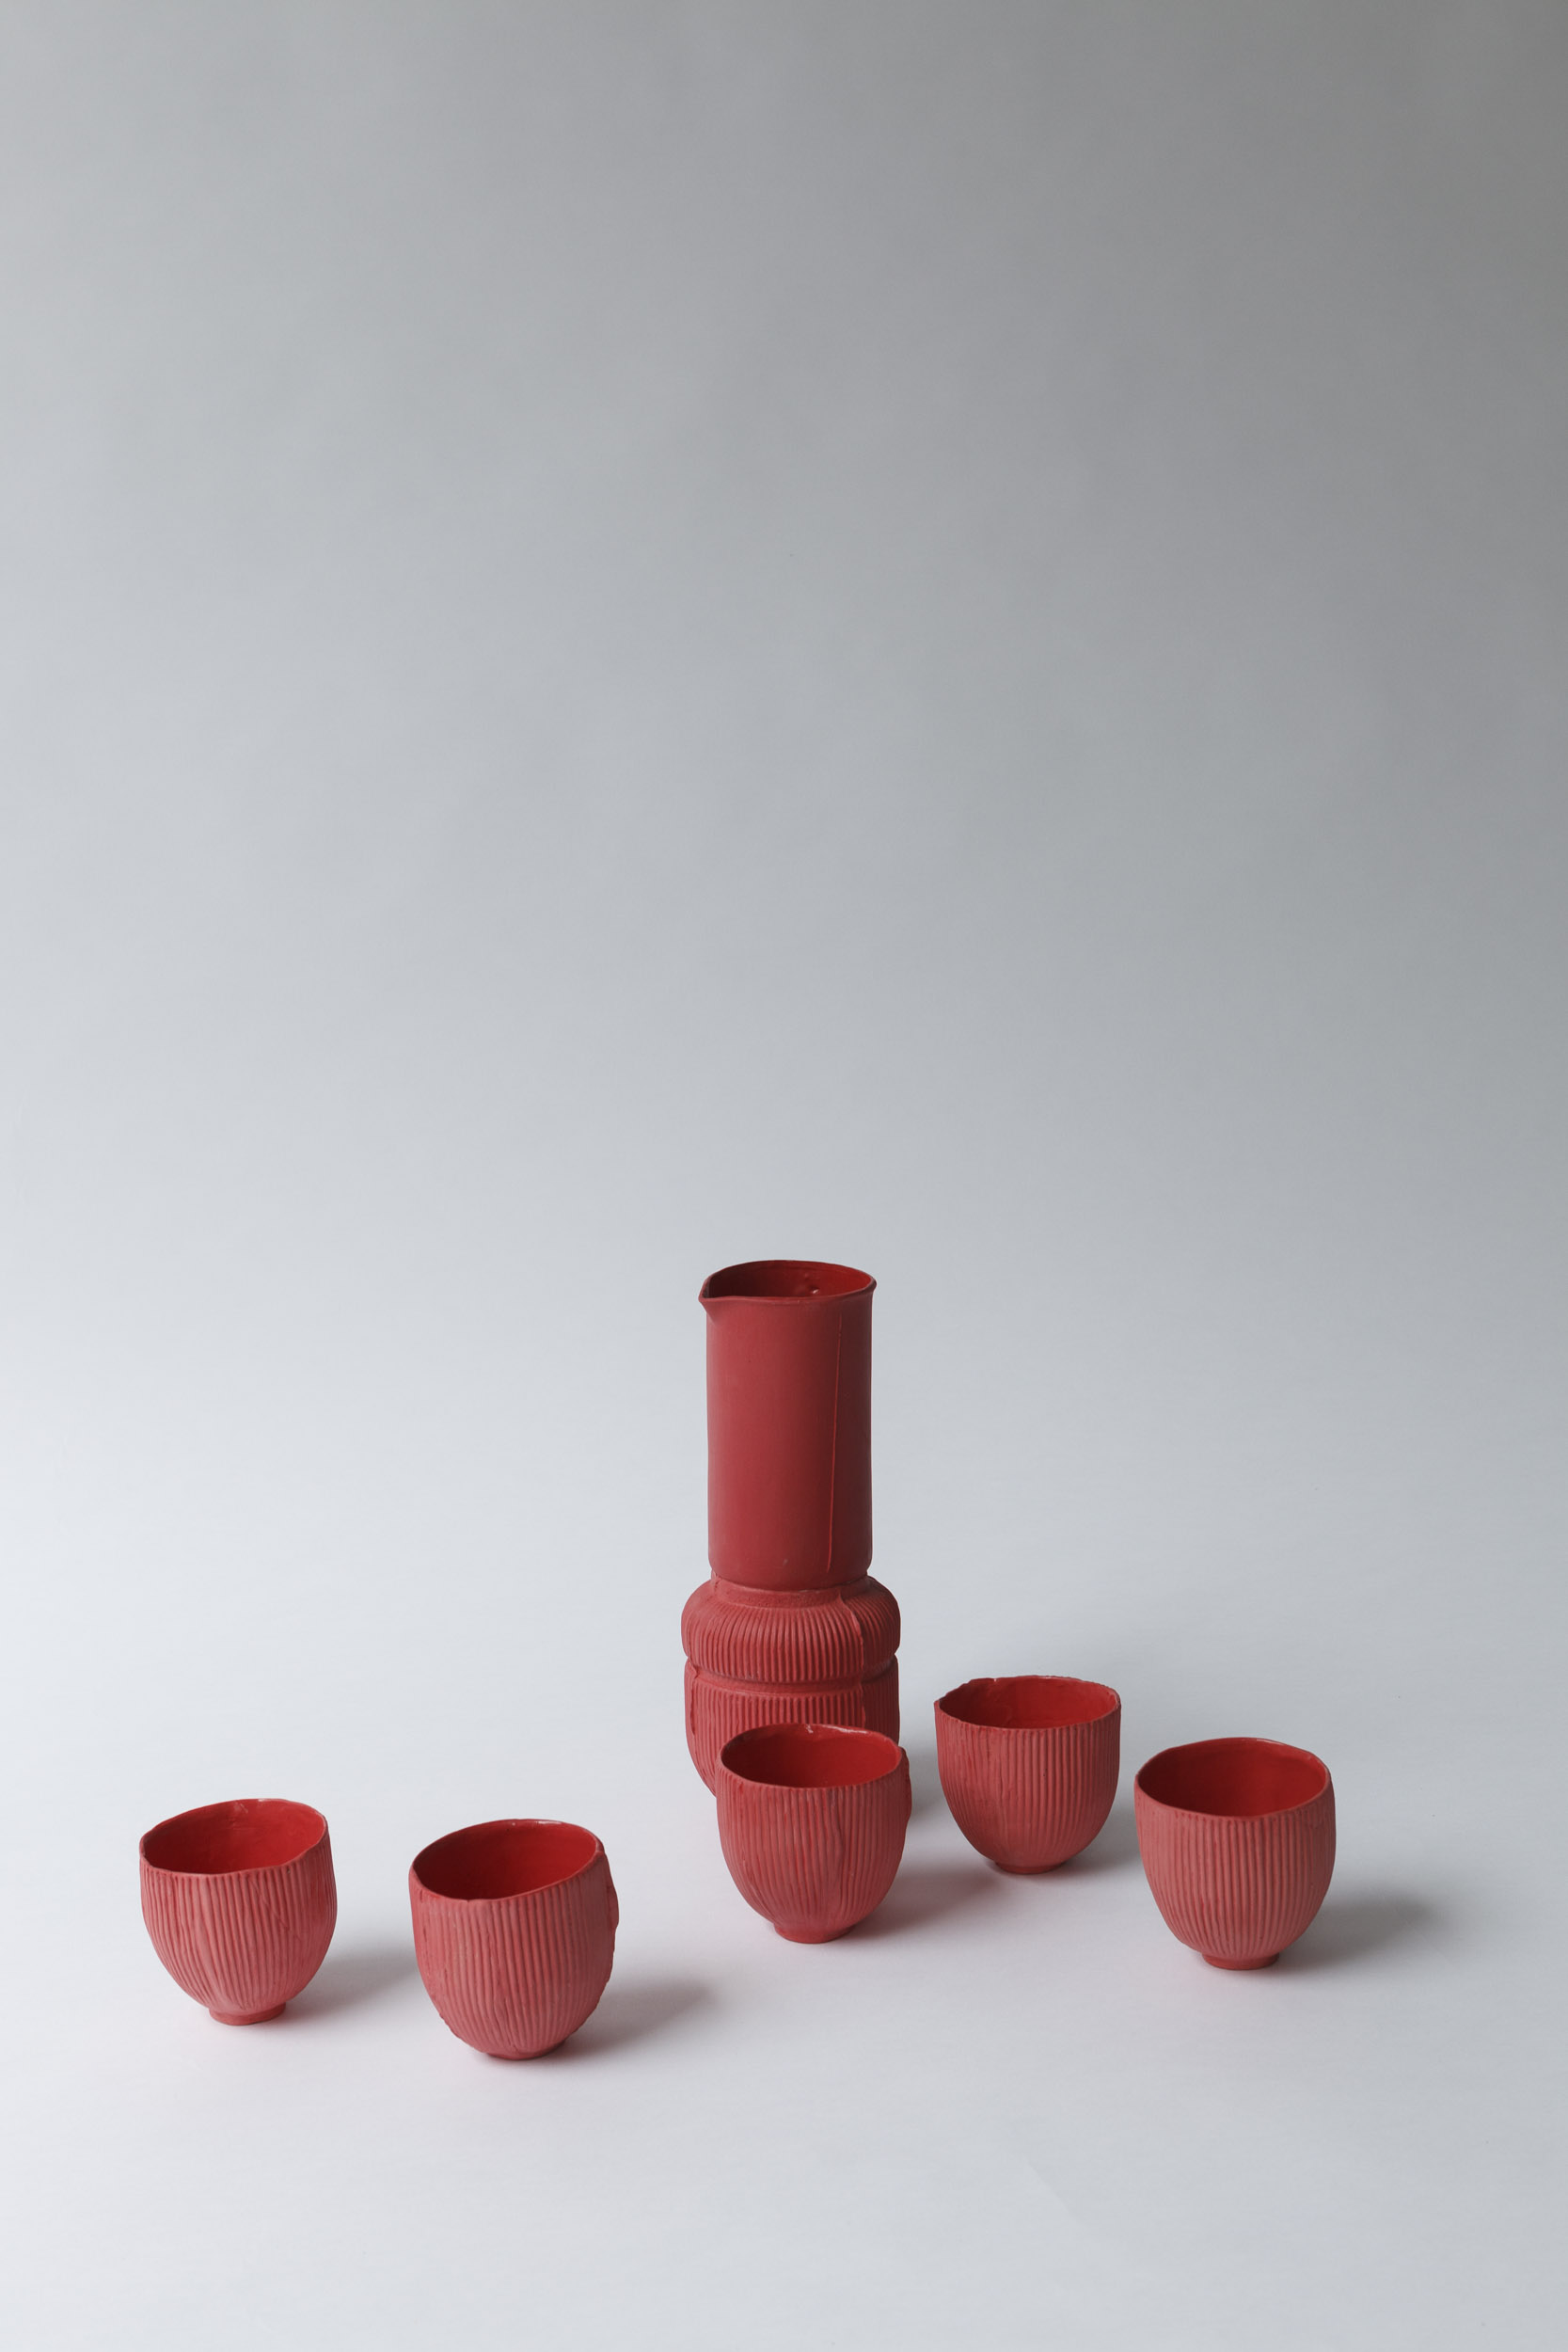  CERAMIC SERIES ITALIAN RED  Red porcelain manufactured by ceramic artist  Sarah Pschorn   Many thanks to Sarah for this wonderful collaboration!   